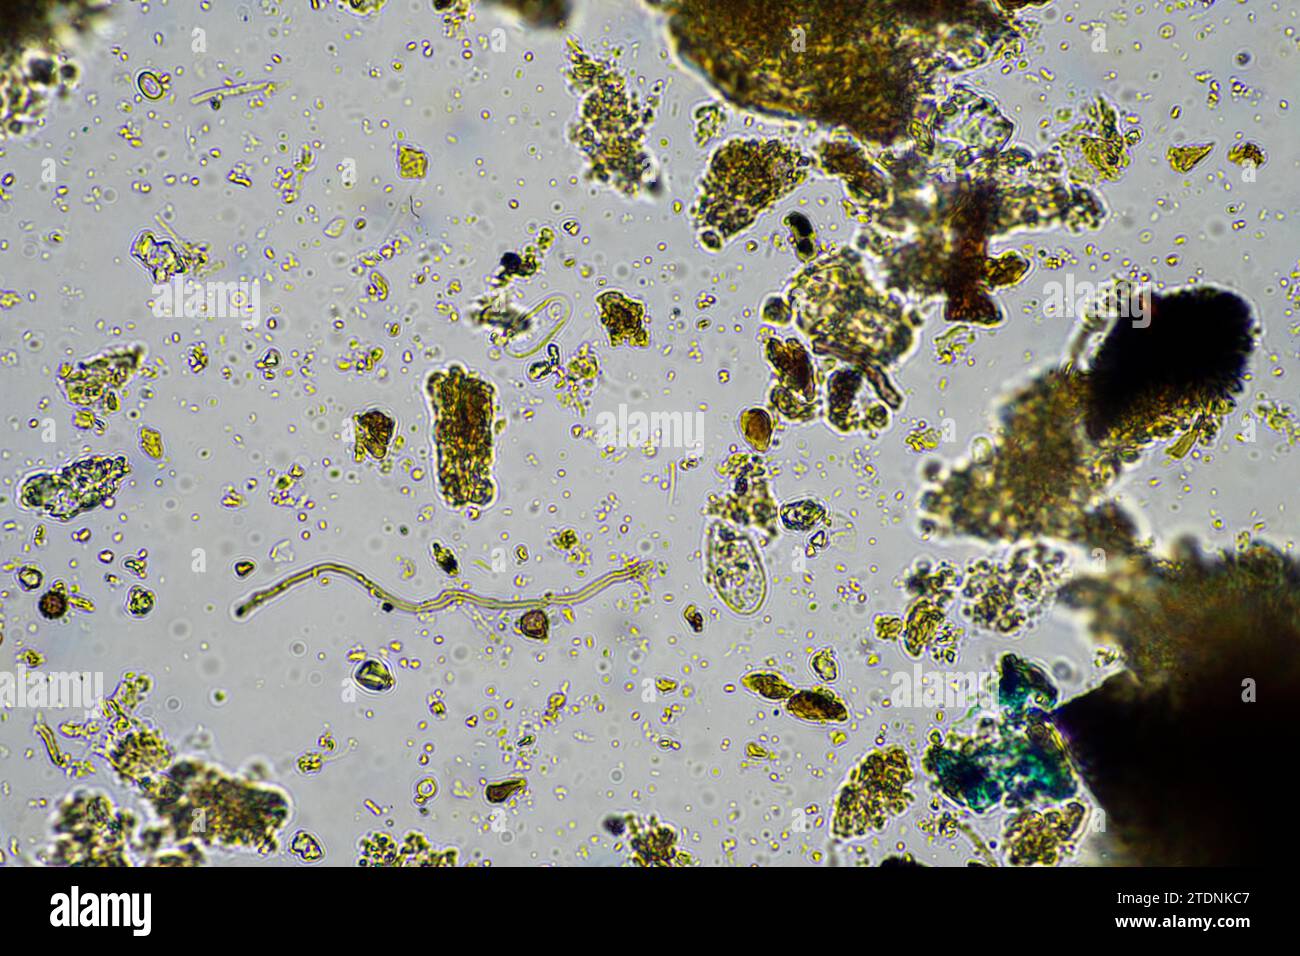 soil microorganism under the microscope recycling nutrients in a compost on a regenerative agriculture farm in australia, showing amoeba, fungi, funga Stock Photo